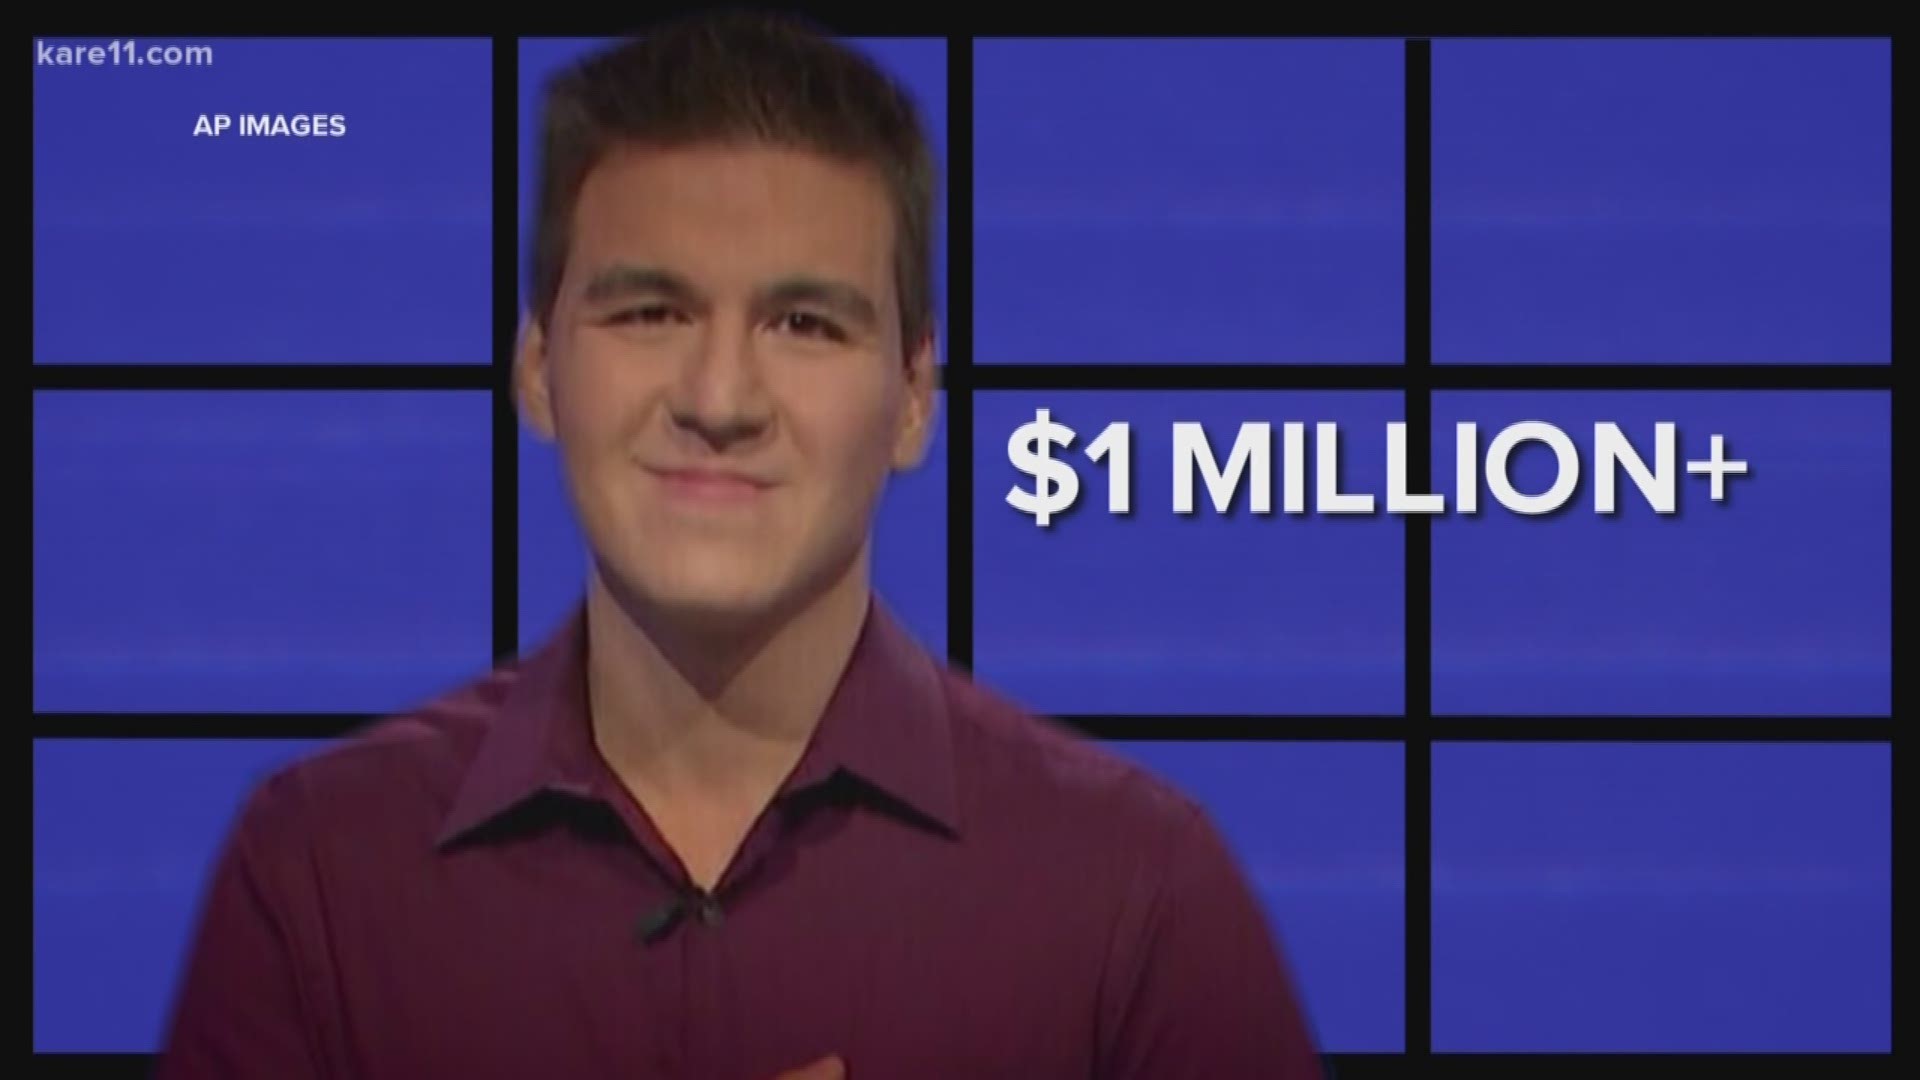 Is James Holzhauer breaking the Jeopardy bank? Think about it - the average show winner comes in at about 20 grand per episode. Holzhauer's average is $71,000.